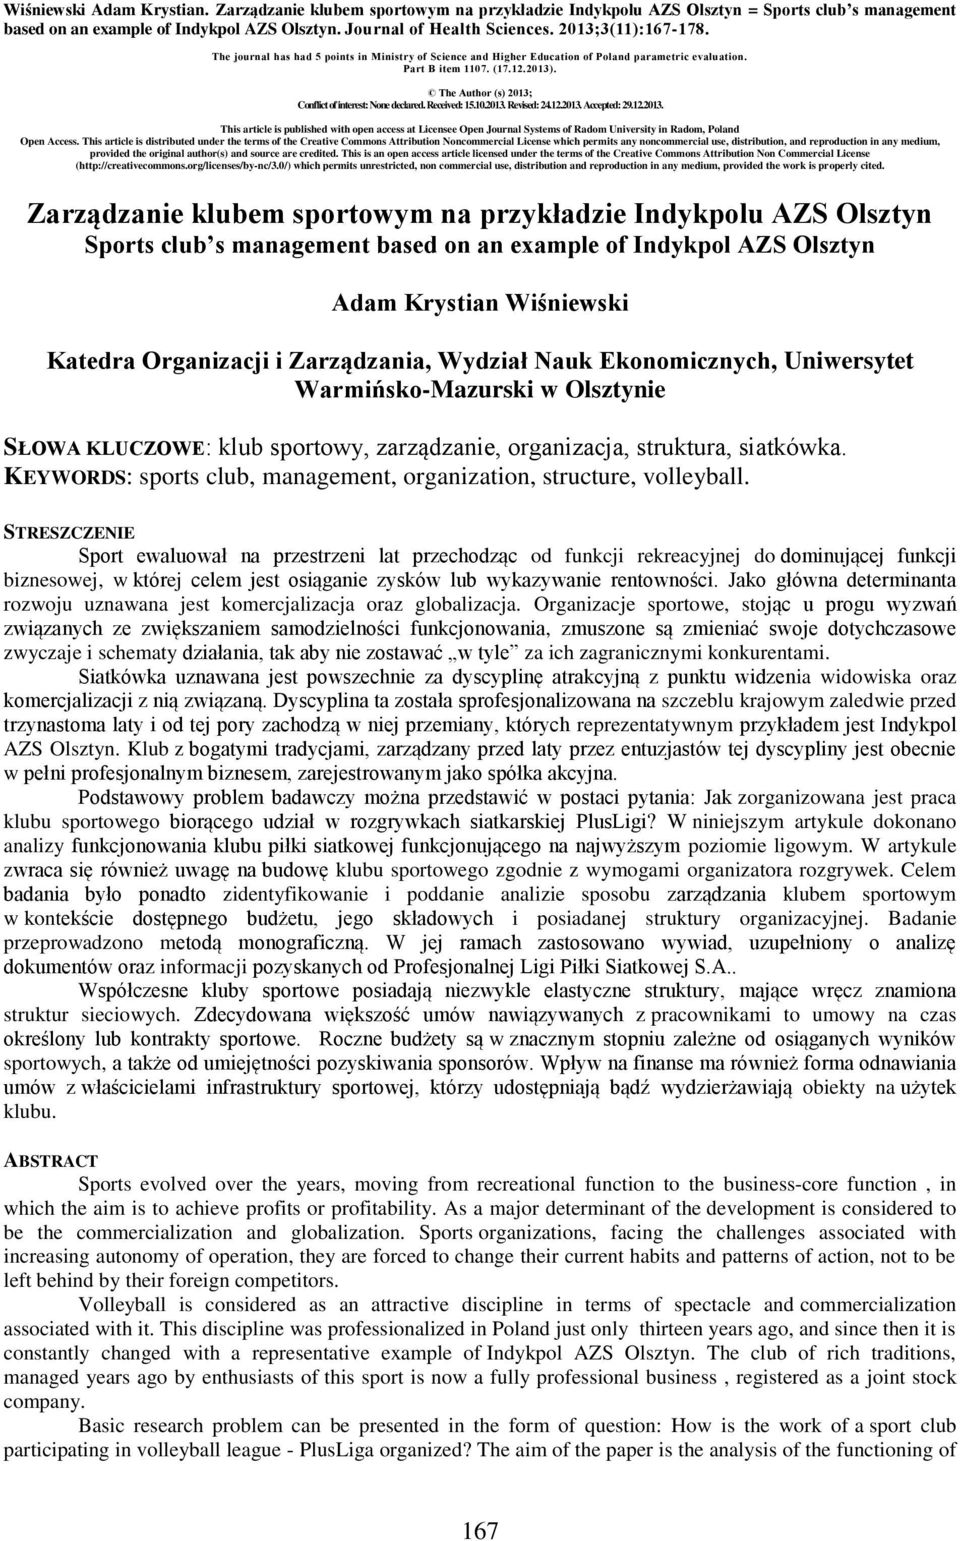 The Author (s) 2013; Conflict of interest: None declared. Received: 15.10.2013. Revised: 24.12.2013. Accepted: 29.12.2013. This article is published with open access at Licensee Open Journal Systems of Radom University in Radom, Poland Open Access.